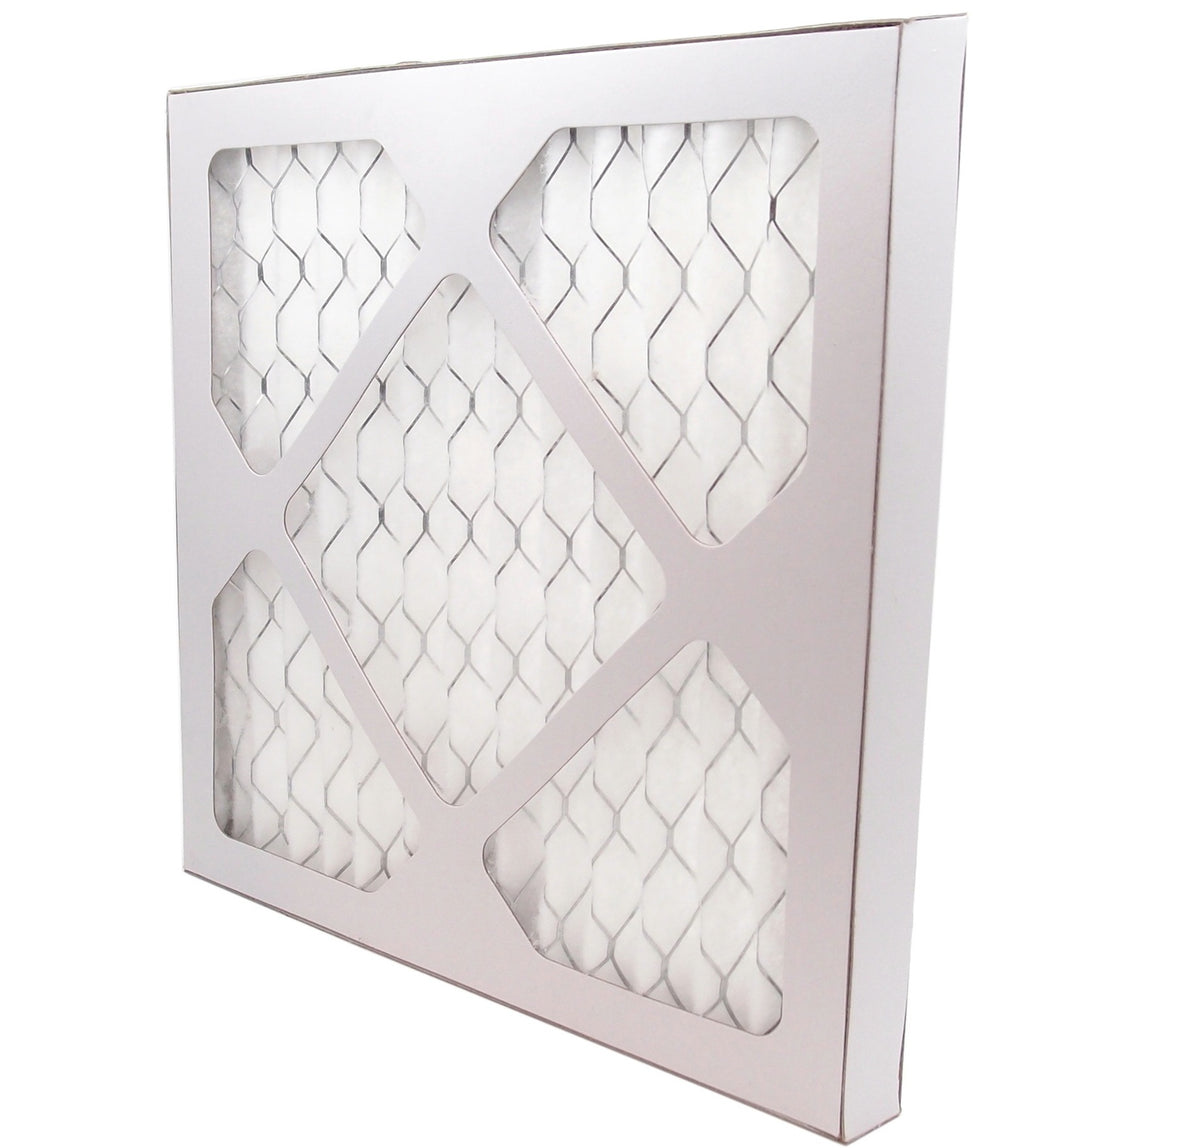 16&quot; x 22&quot; Pleated MERV 8 Filter for HVAC Return Filter Grille